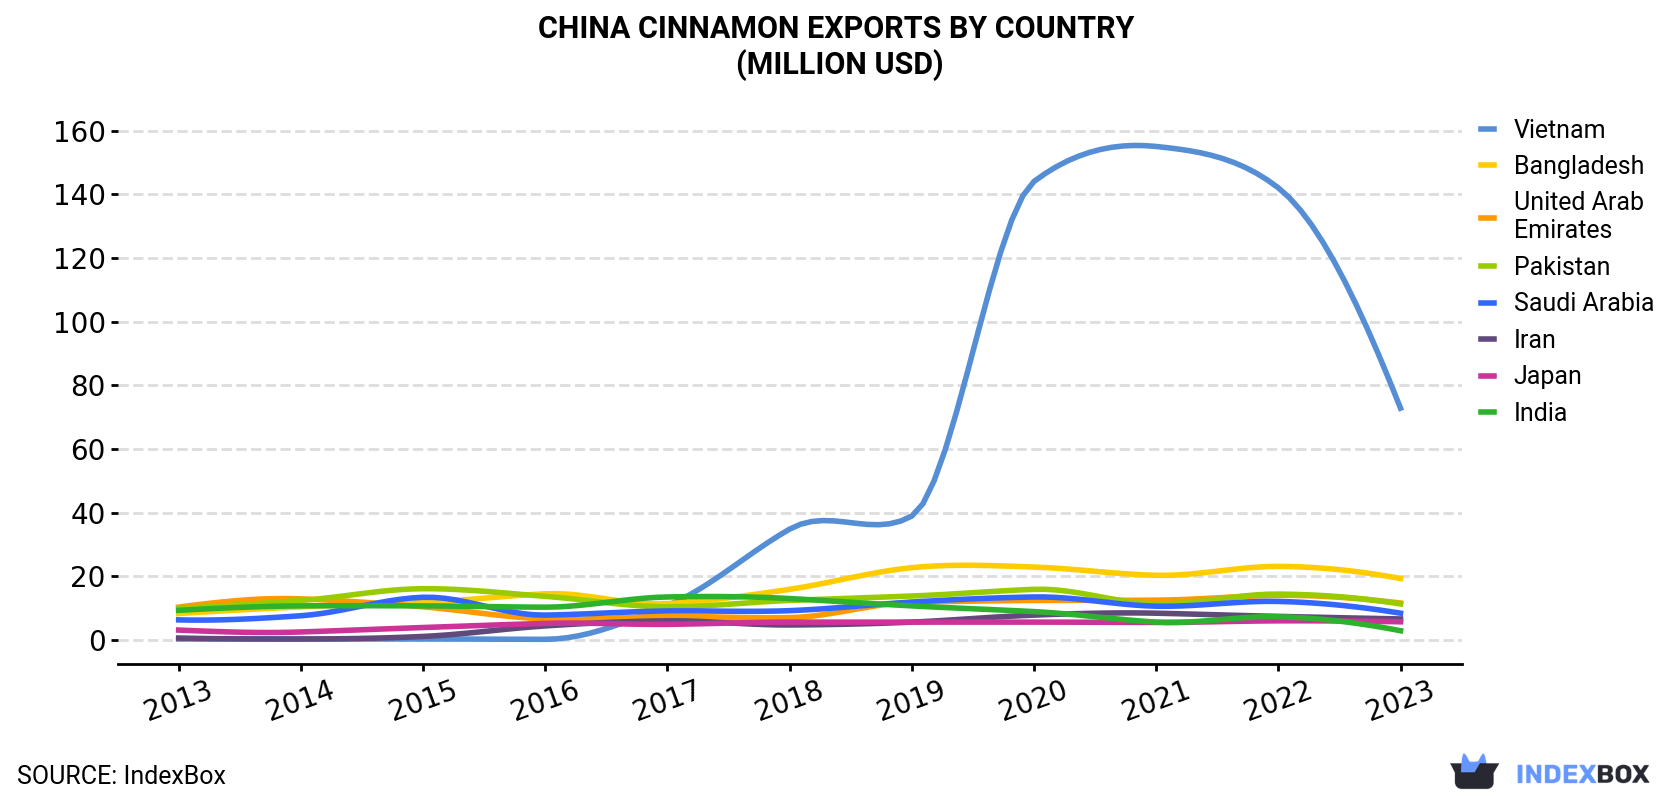 China Cinnamon Exports By Country (Million USD)